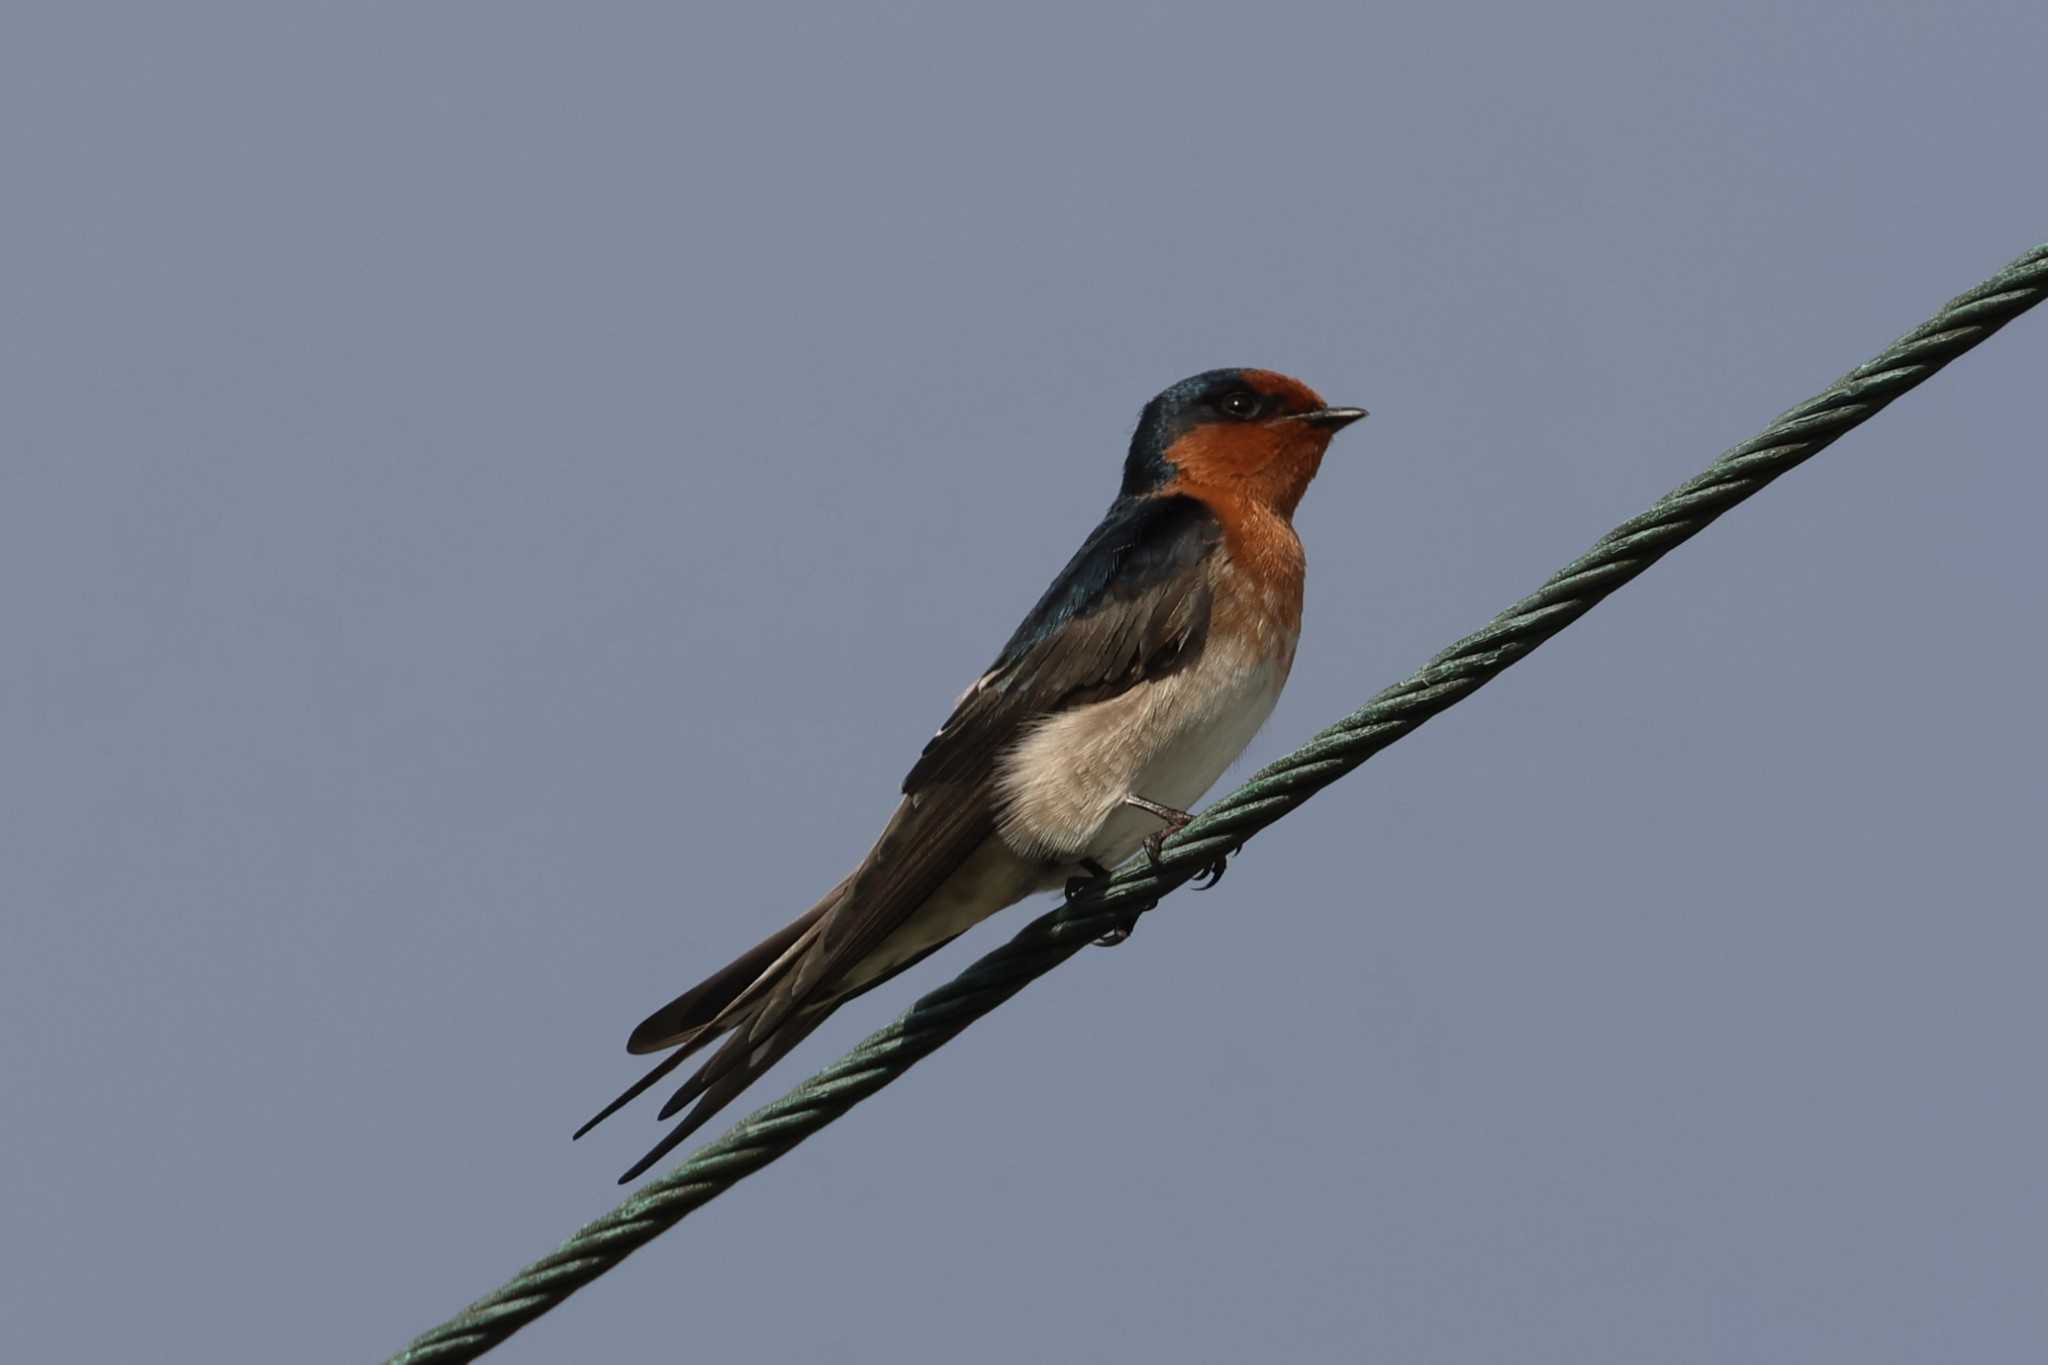 Welcome Swallow